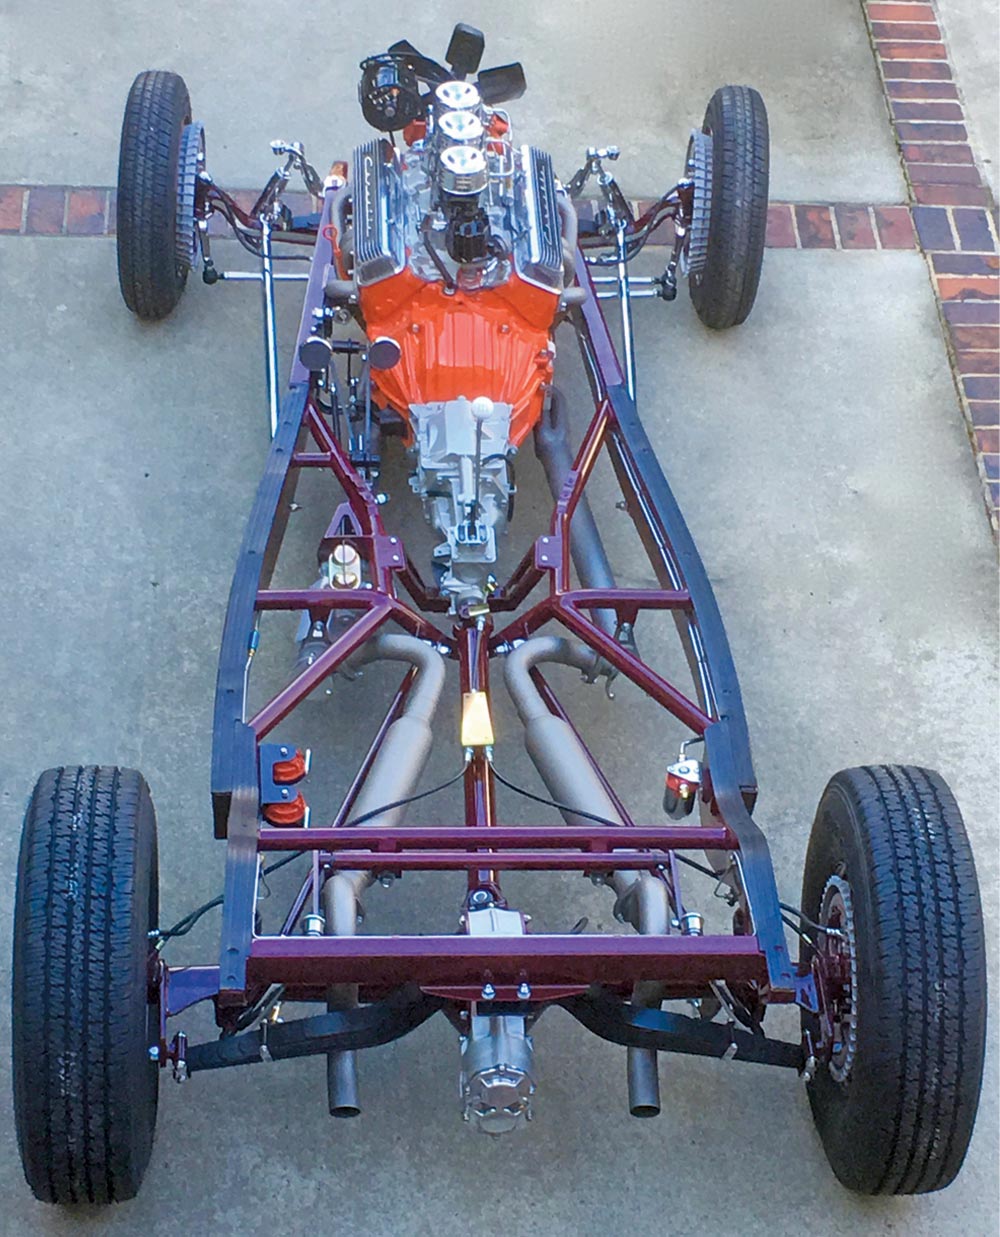 final overhead view of a beautiful hot rod chassis